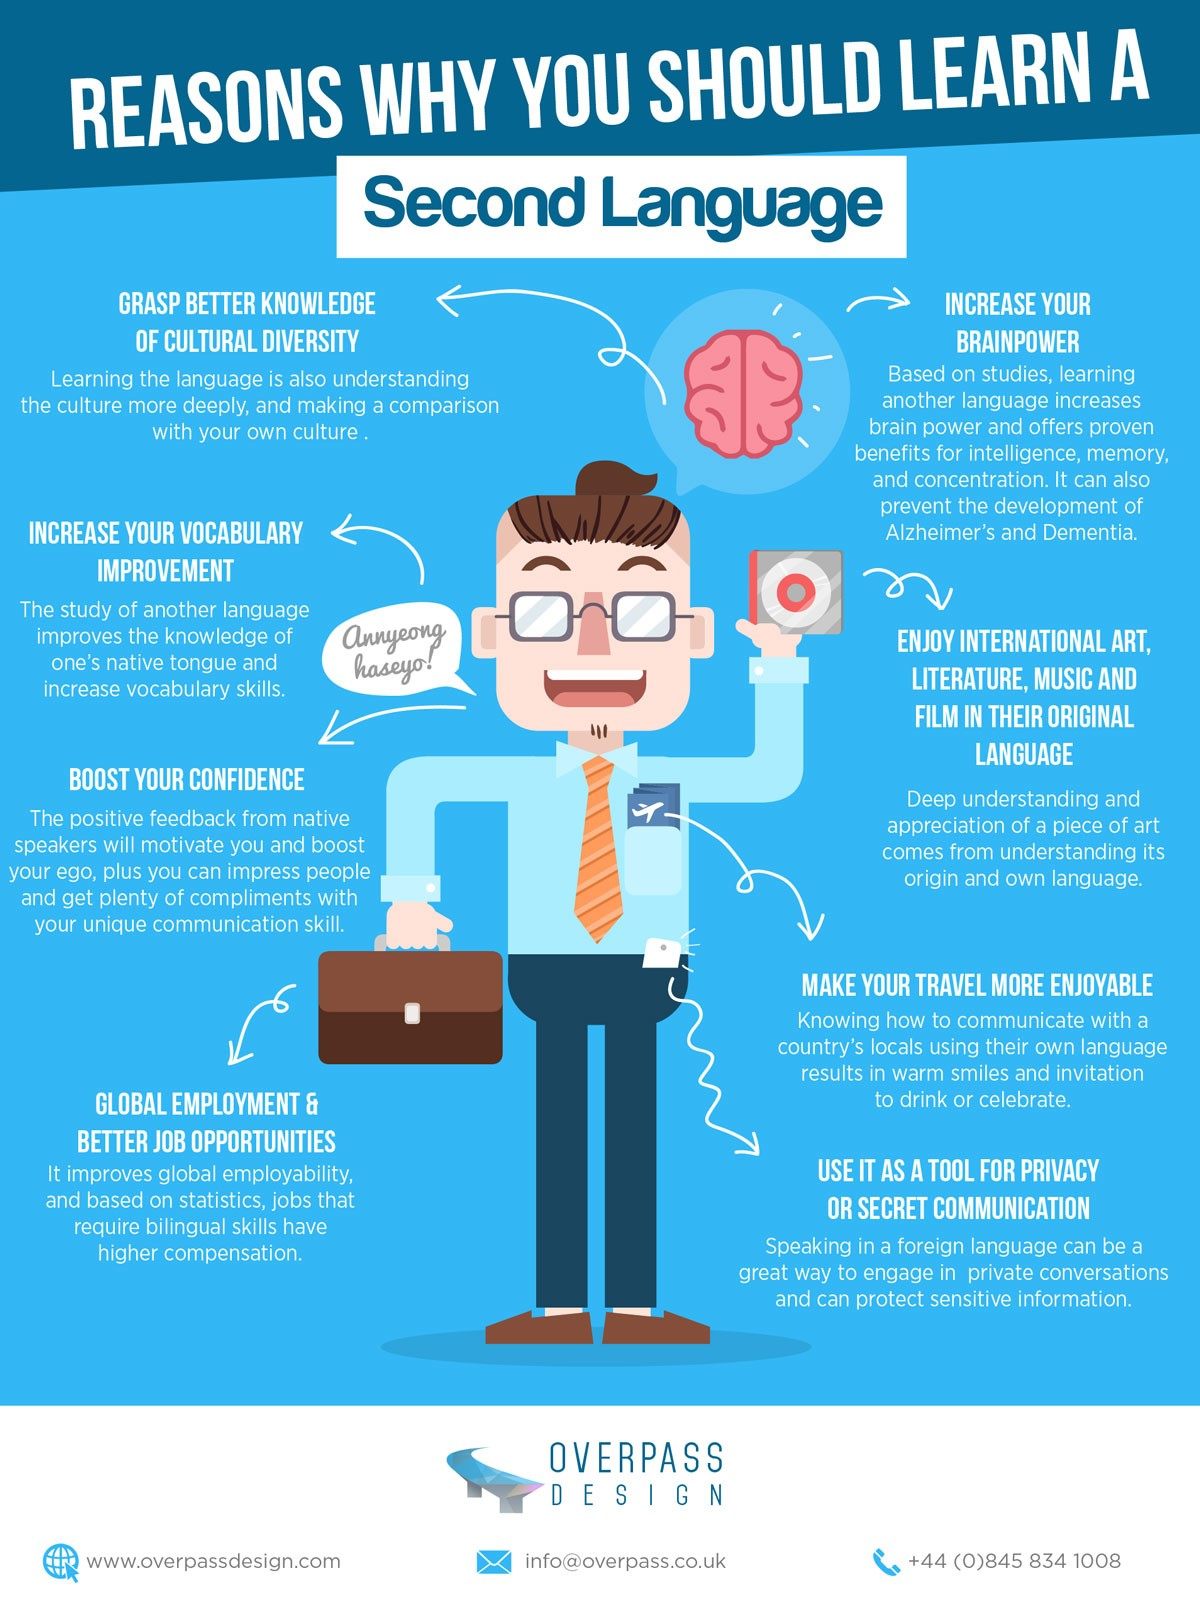 Benefits Of Learning A Second Language